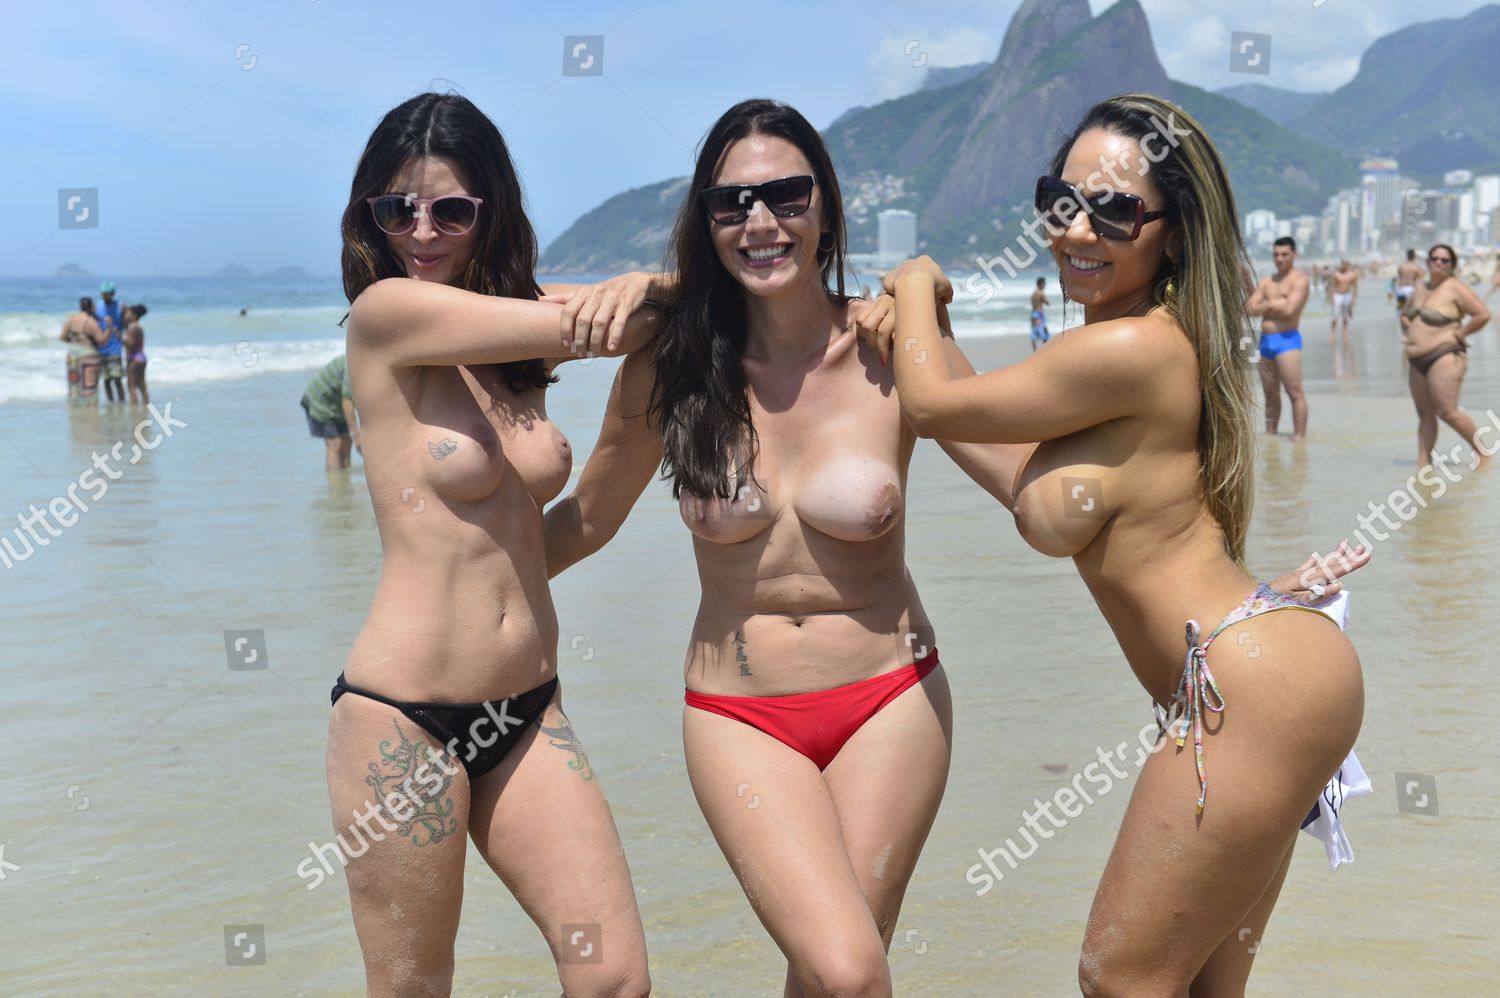 Movement Created Legalisation Topless Bathing Brazil -3479